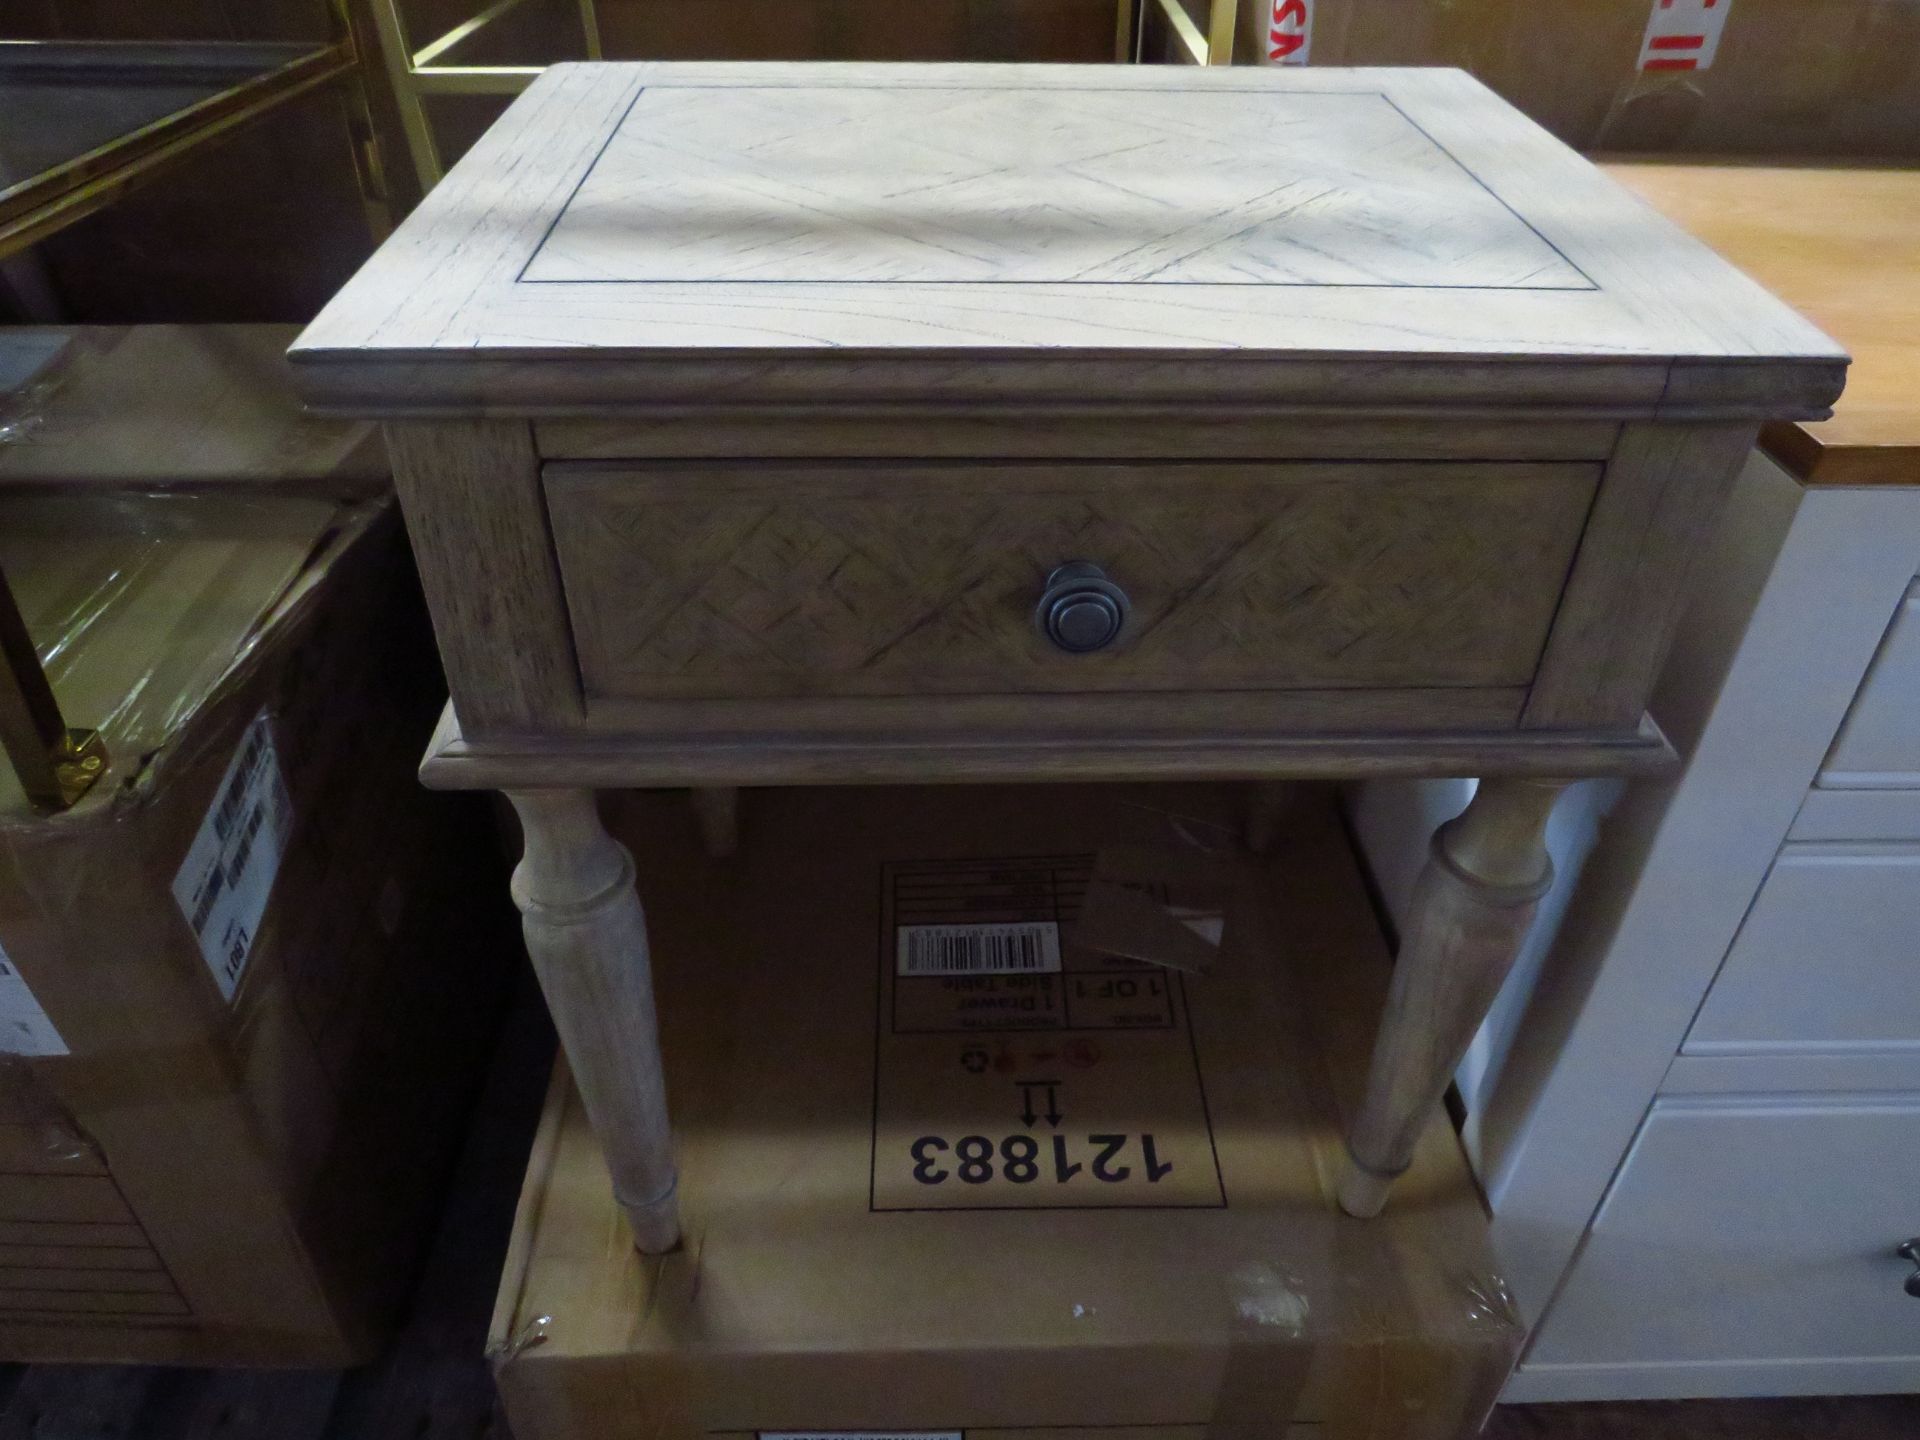 Moot Group Gallery Direct Kingham 1 Drawer Side Table RRP Â£168.00 - This item looks to be in good